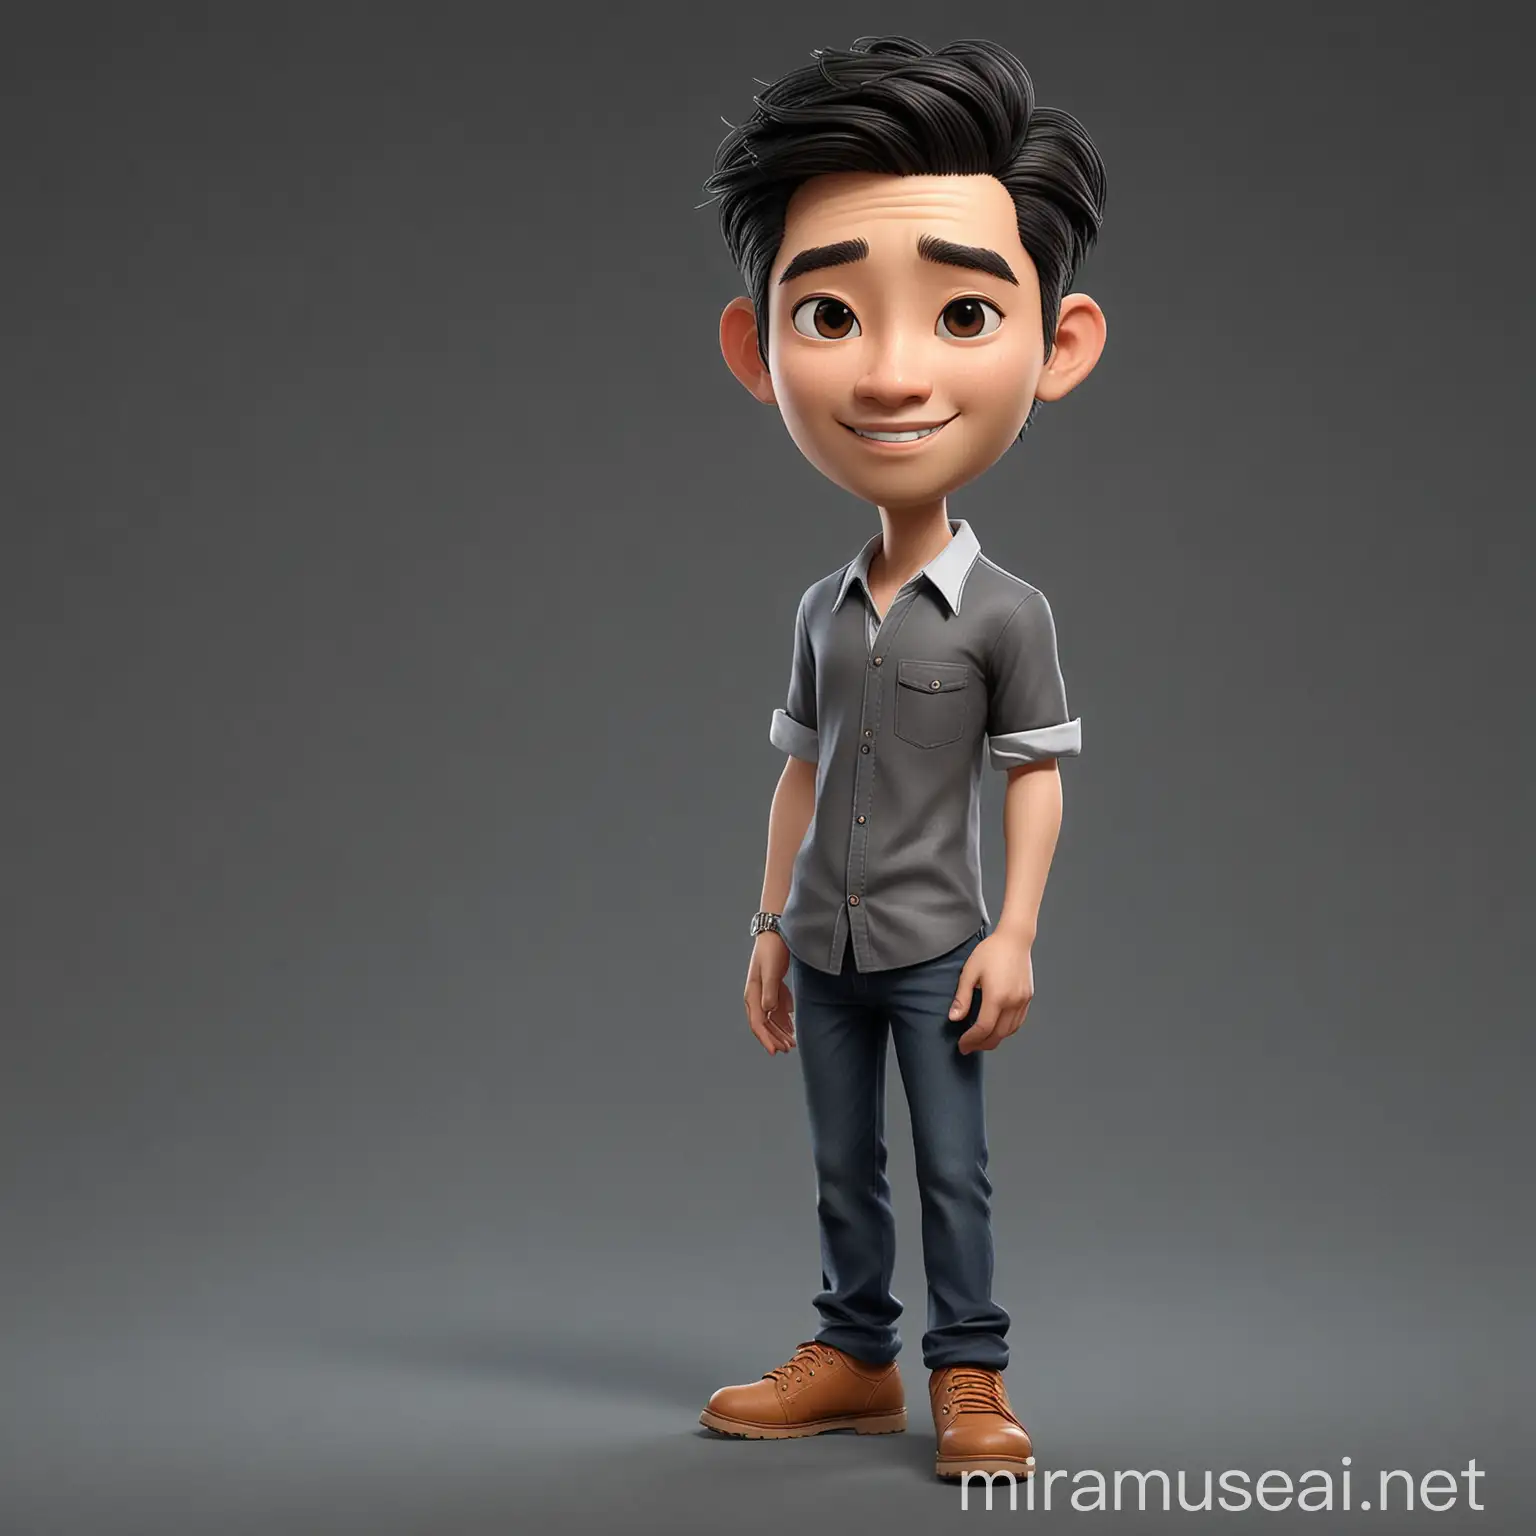 a cartoon character of a man asian middle part hair, clear face full body ,and a shirt black, cartoon style, for hire 3d artist, caricature style, 3 d artist, realistic , in studio photos baground
